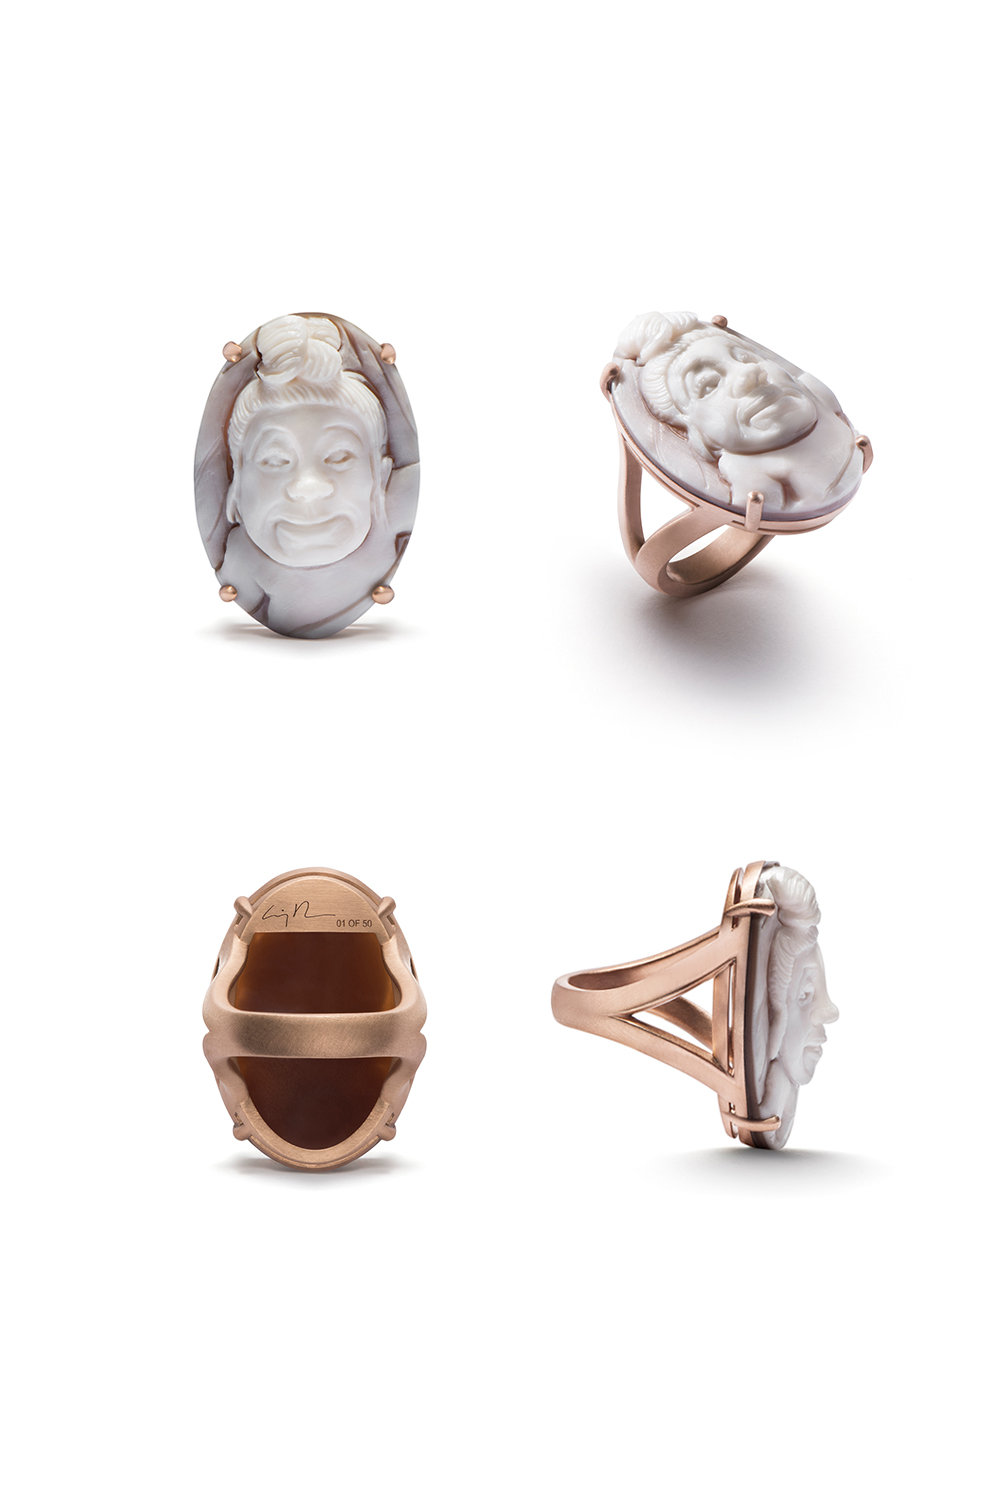 Cindy-Sherman-cameo-baby-ring-art-jewels-3